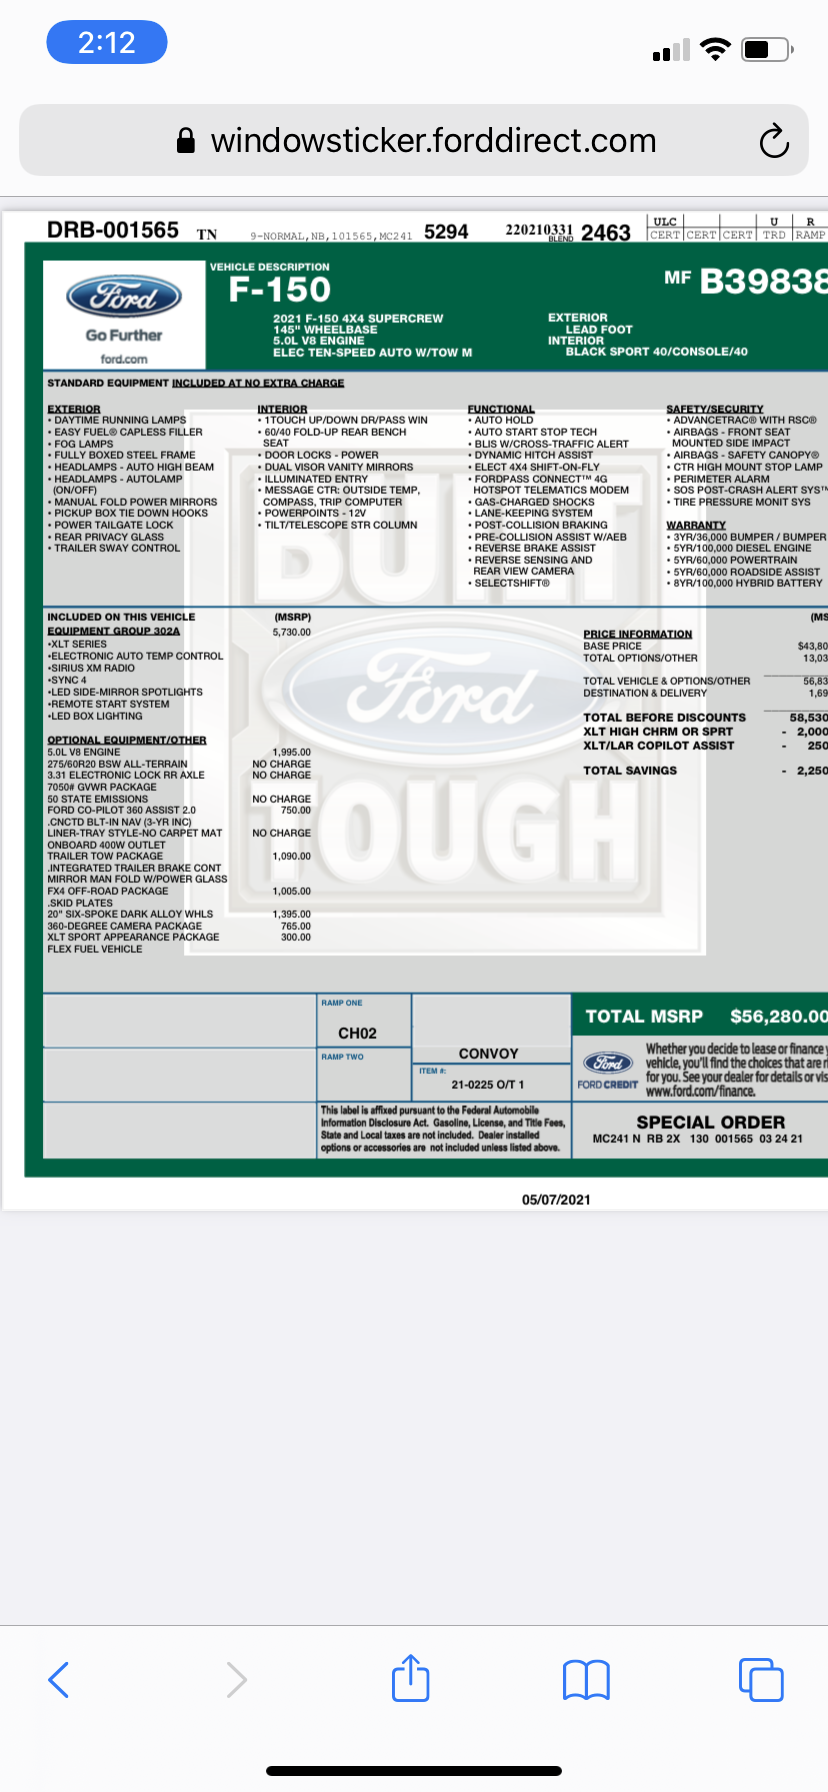 Ford F-150 How many days since you ordered (still waiting on delivery) thread 62FD5997-C3A0-4C0A-AC99-AD6E0E91C317